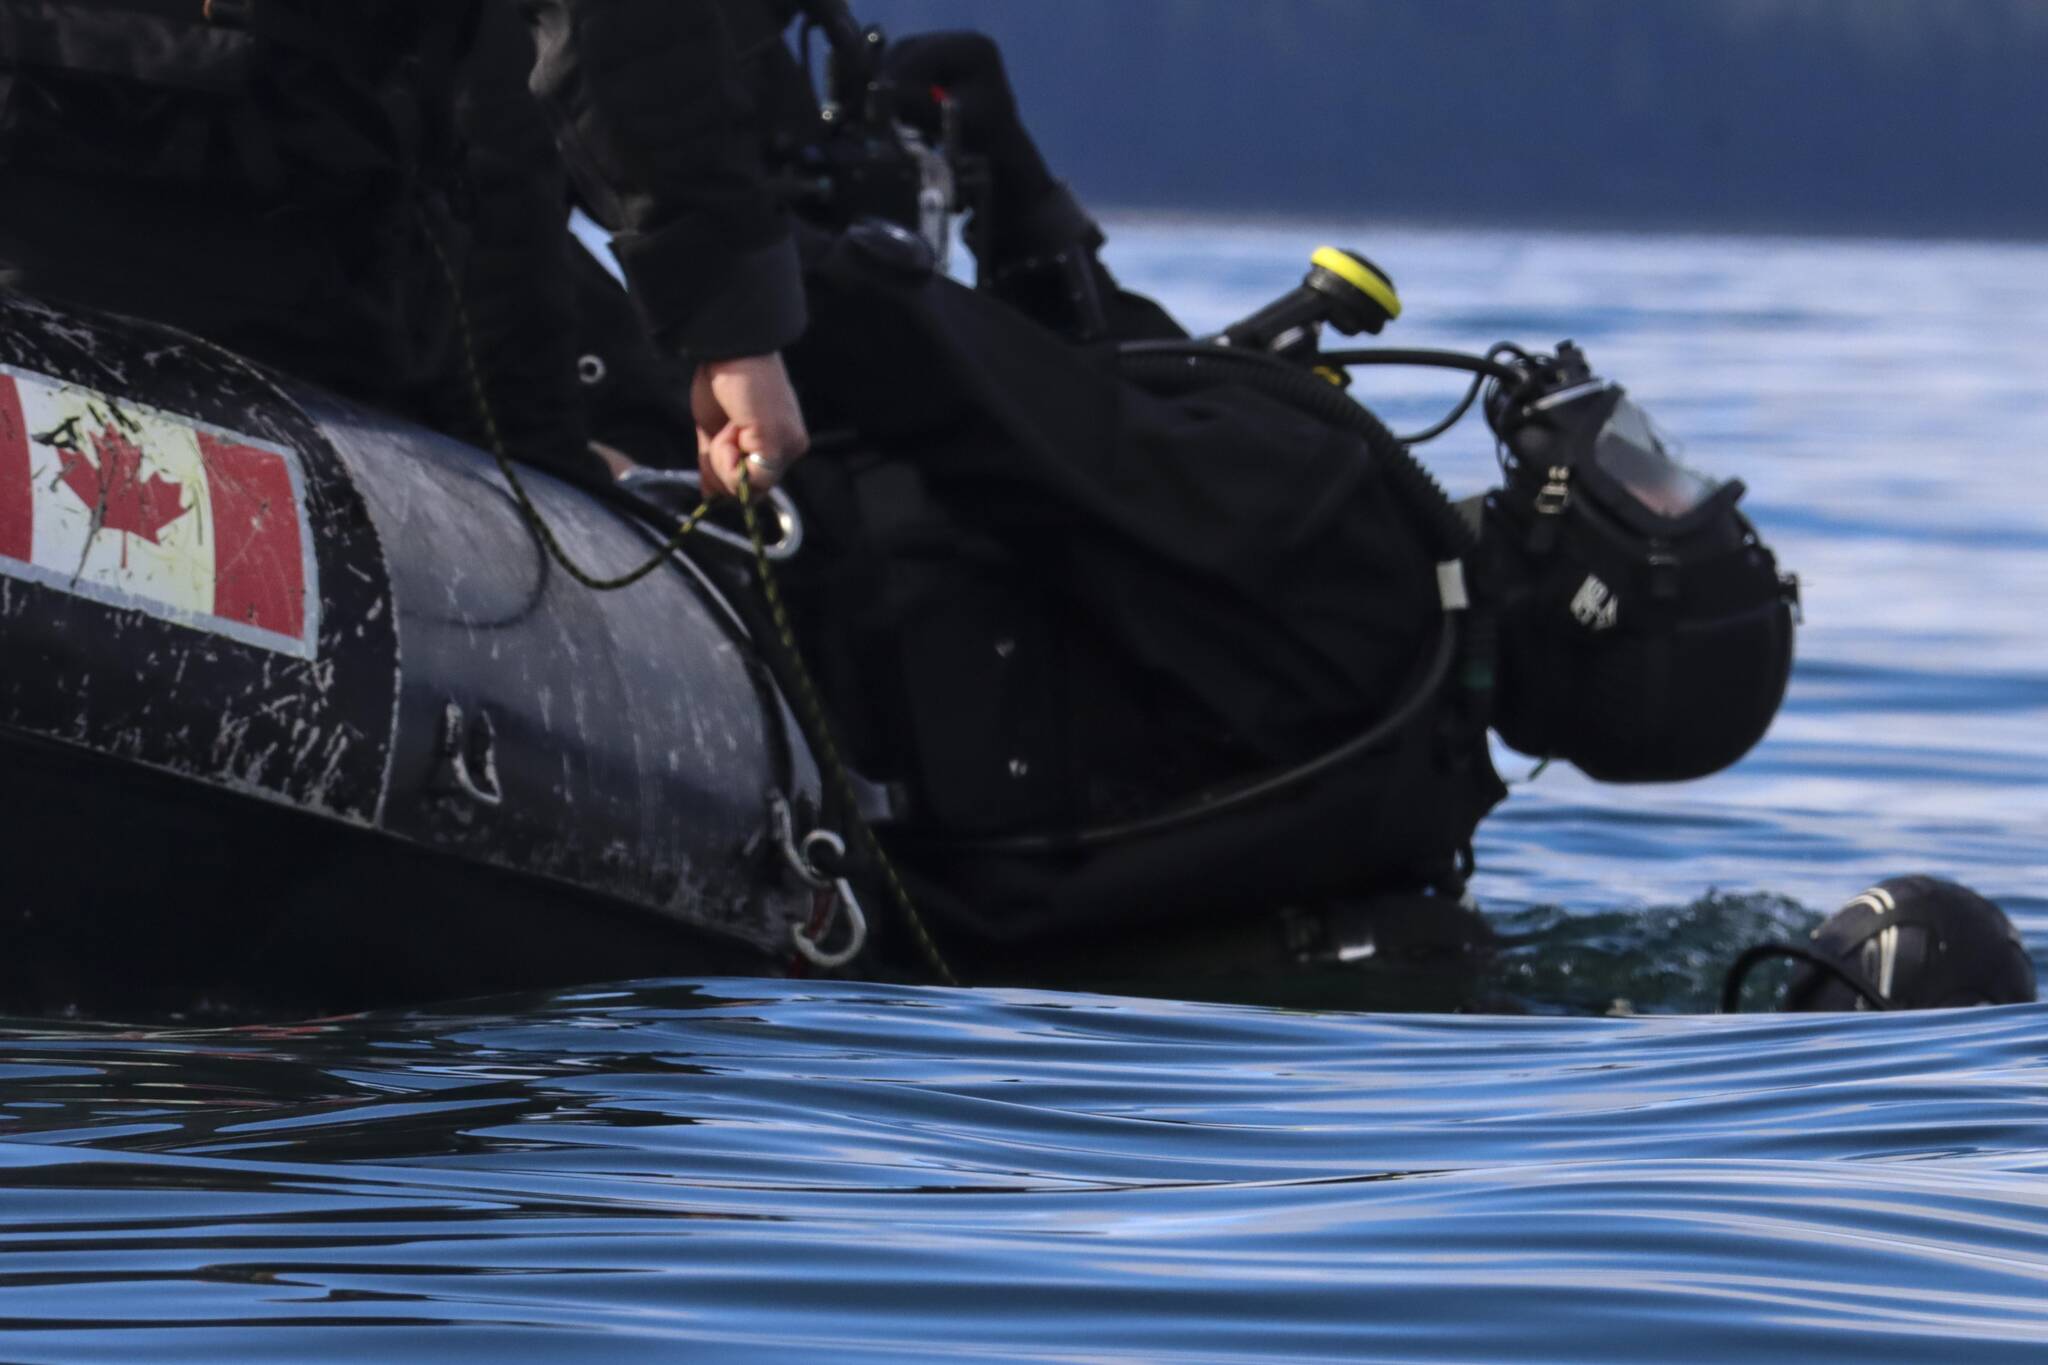 Royal Canadian Navy divers enter the water to go investigate a simulated naval mine in Stephens Passage on March 6, 2022 as part of exercise Arctic Edge 2022. (Michael S. Lockett / Juneau Empire)ckett / Juneau Empire)